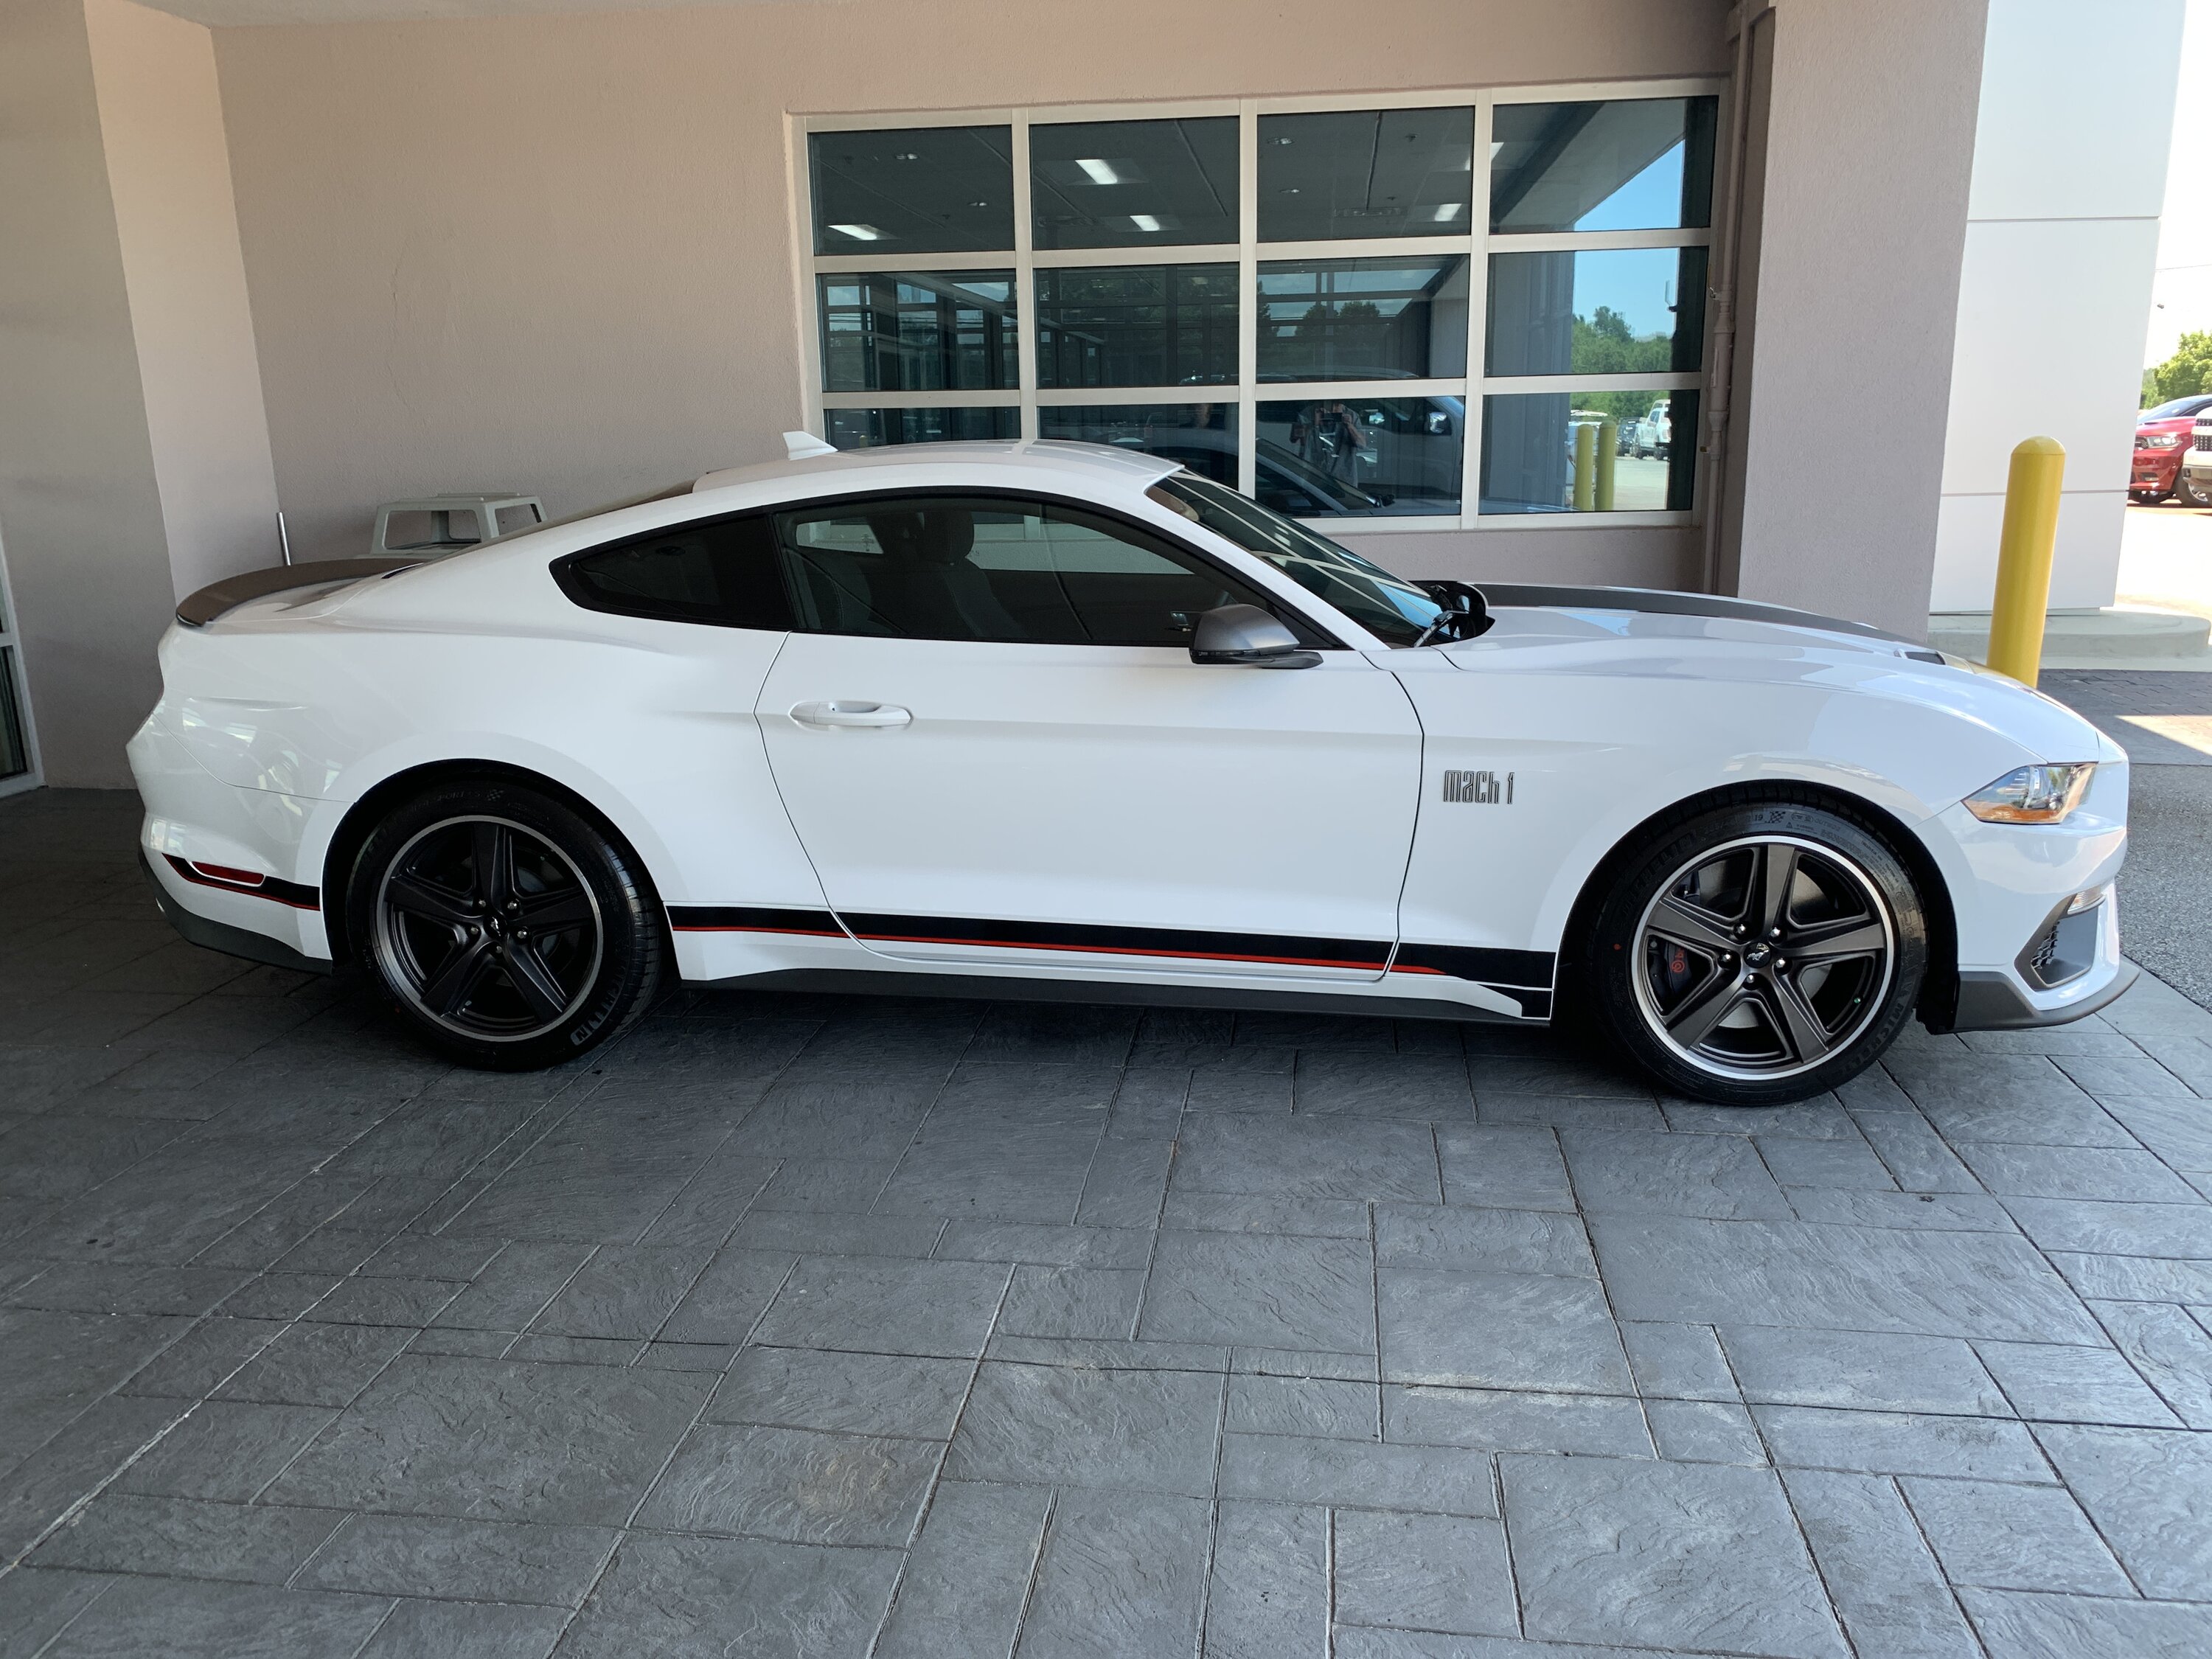 S650 Mustang Is the Dark Horse worth it? IMG_3519